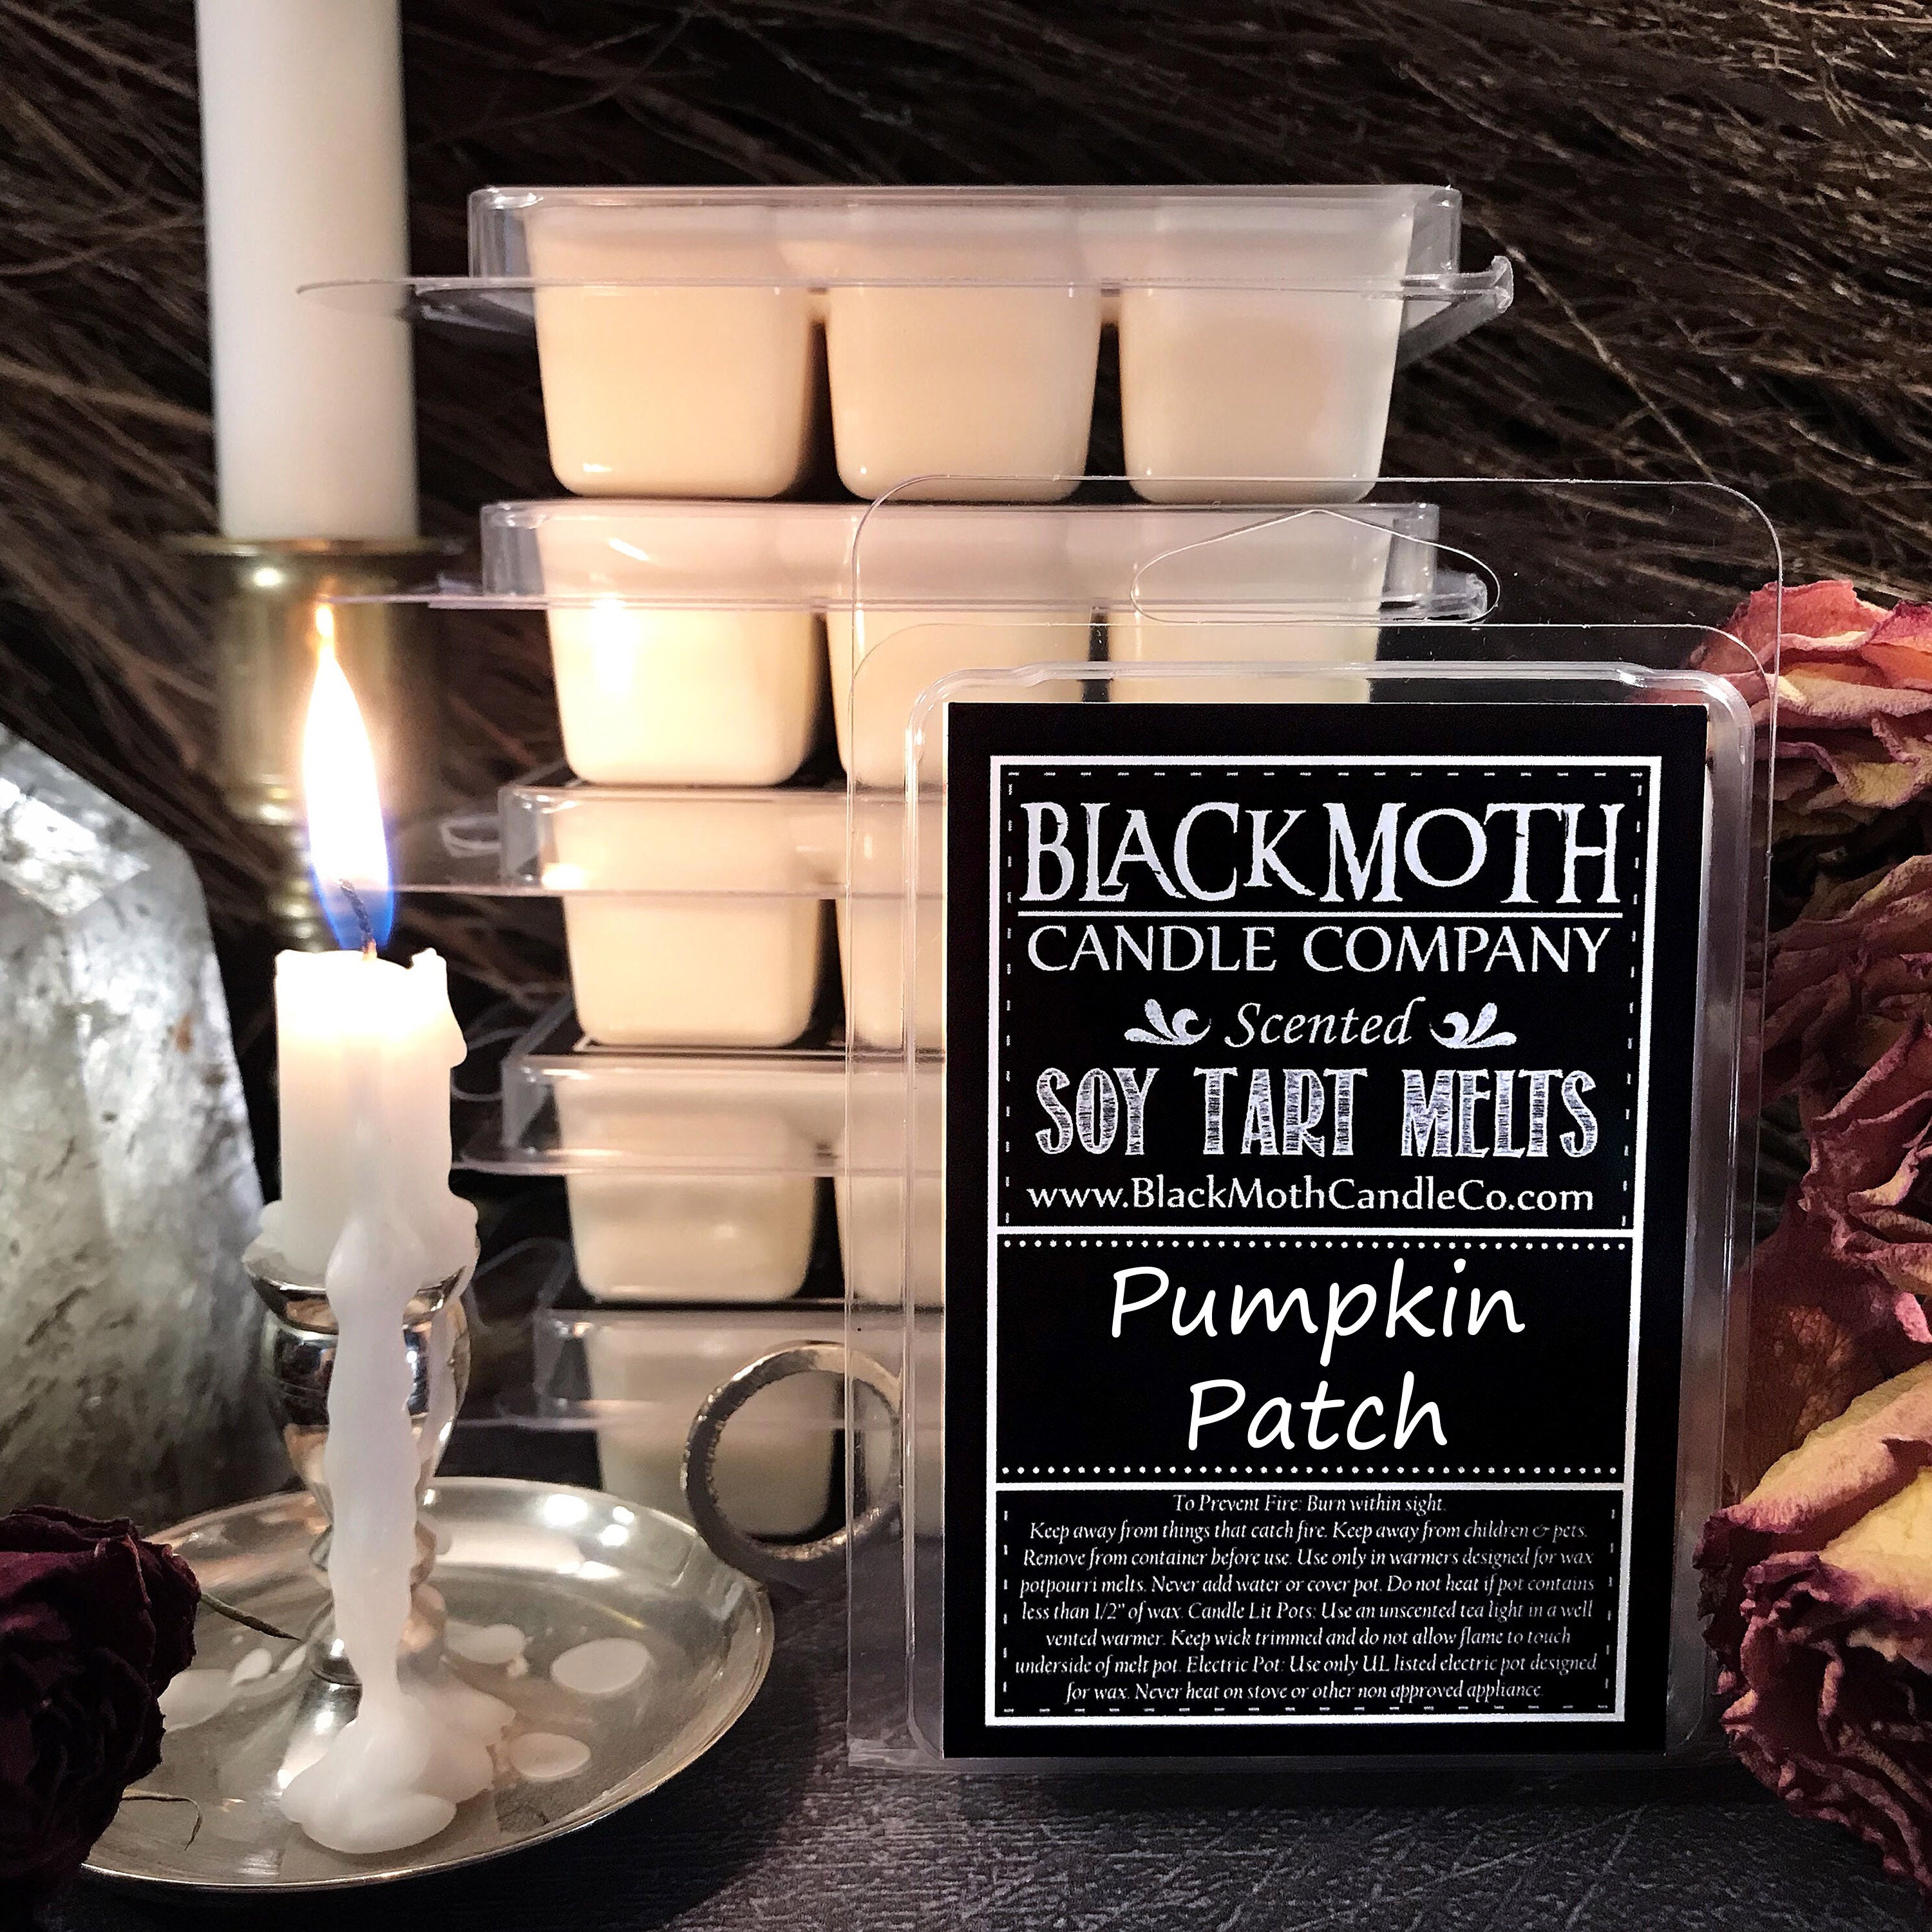 Pumpkin Patch Scented Soy Wax Melts